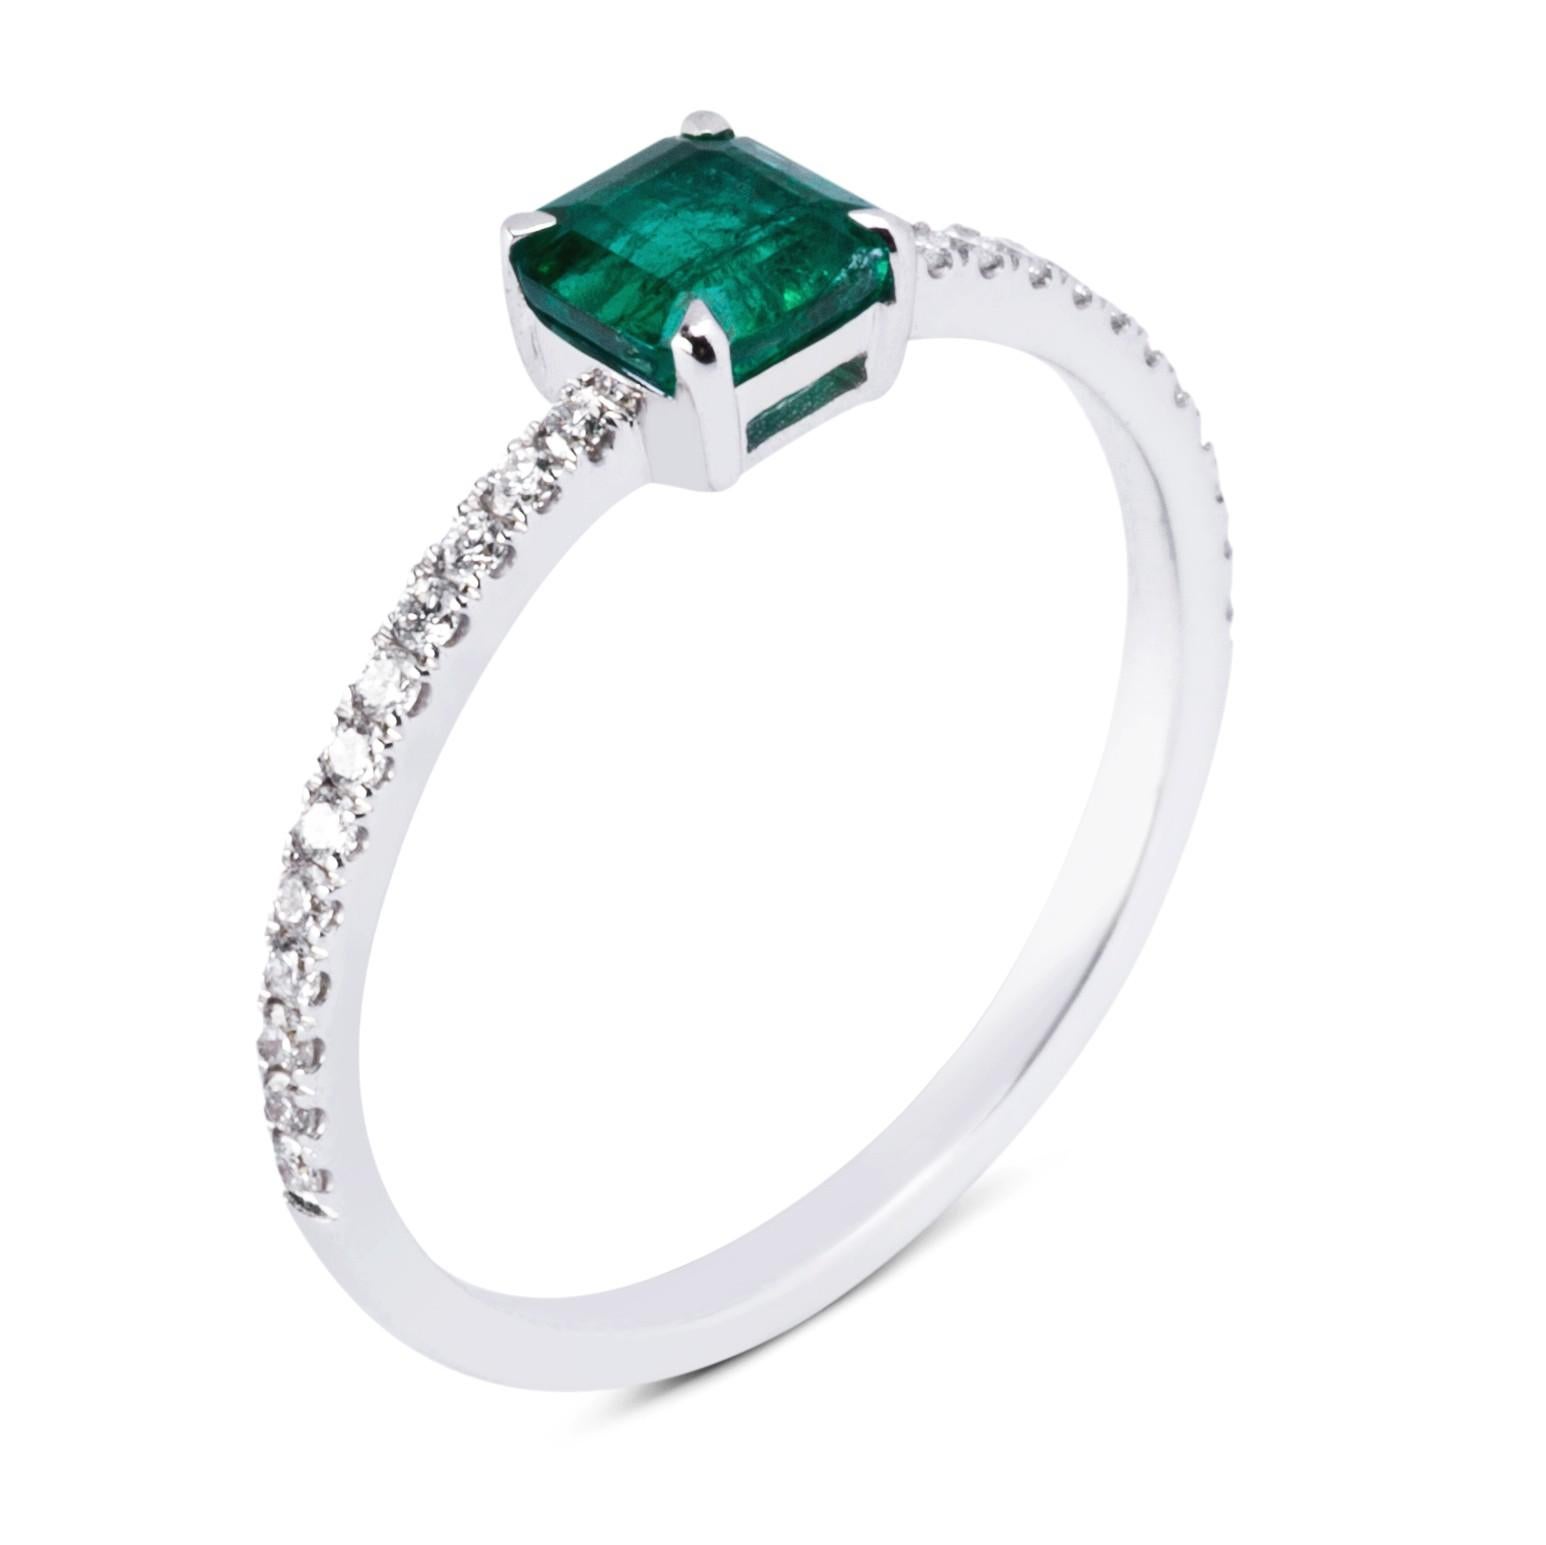 Alex Jona design collection, hand crafted in Italy, 18k white gold solitaire ring, centering a 0.55 carat emerald cut Emerald. The shoulders are set with 24 white diamonds, weighing 0.20 carats in total, F color, VVS1 clarity.
Ring size: 6.5 US/12